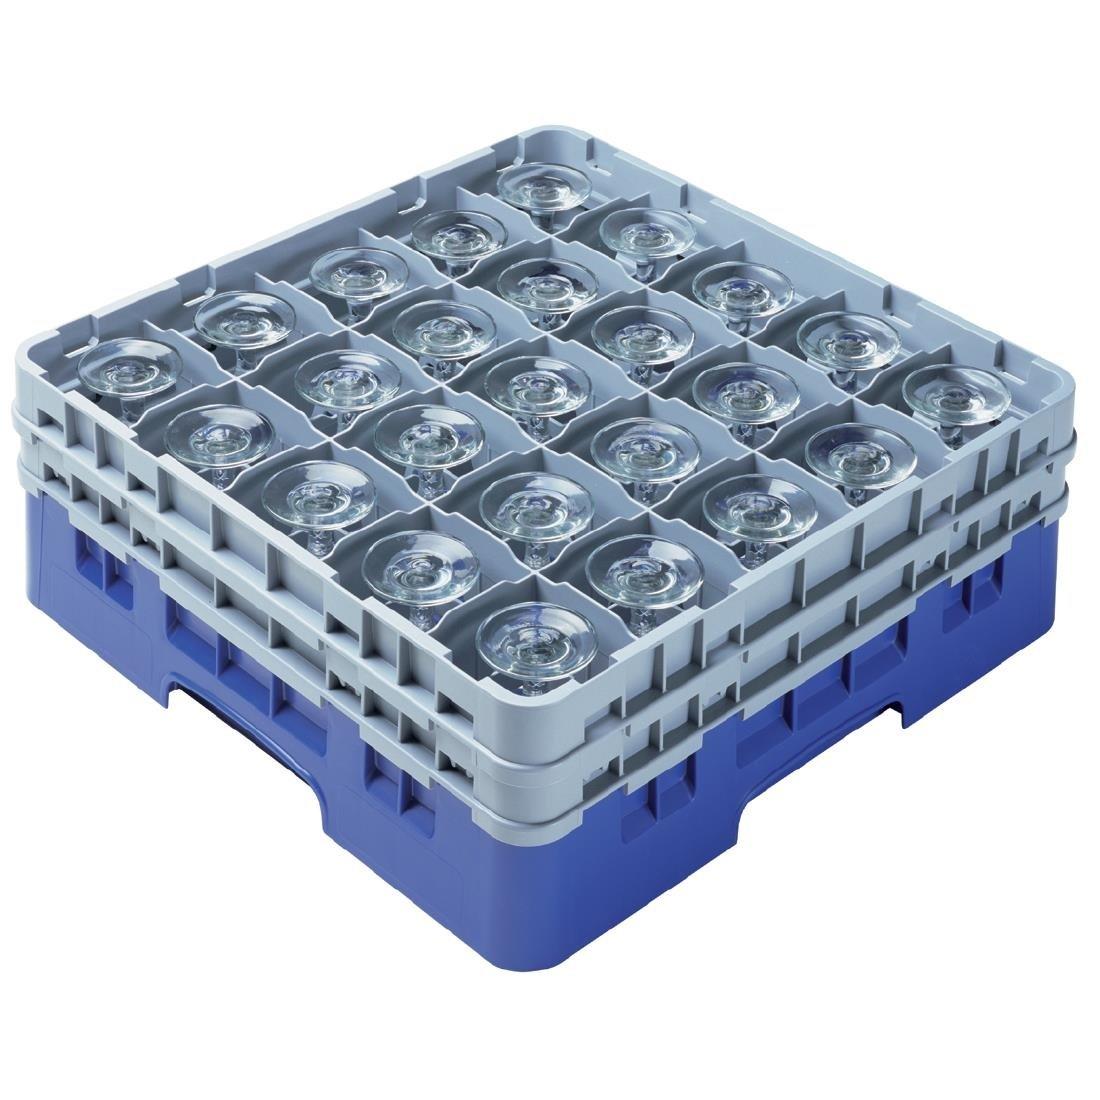 Cambro Camrack Blue 20 Compartments Max Glass Height 298mm - CZ159